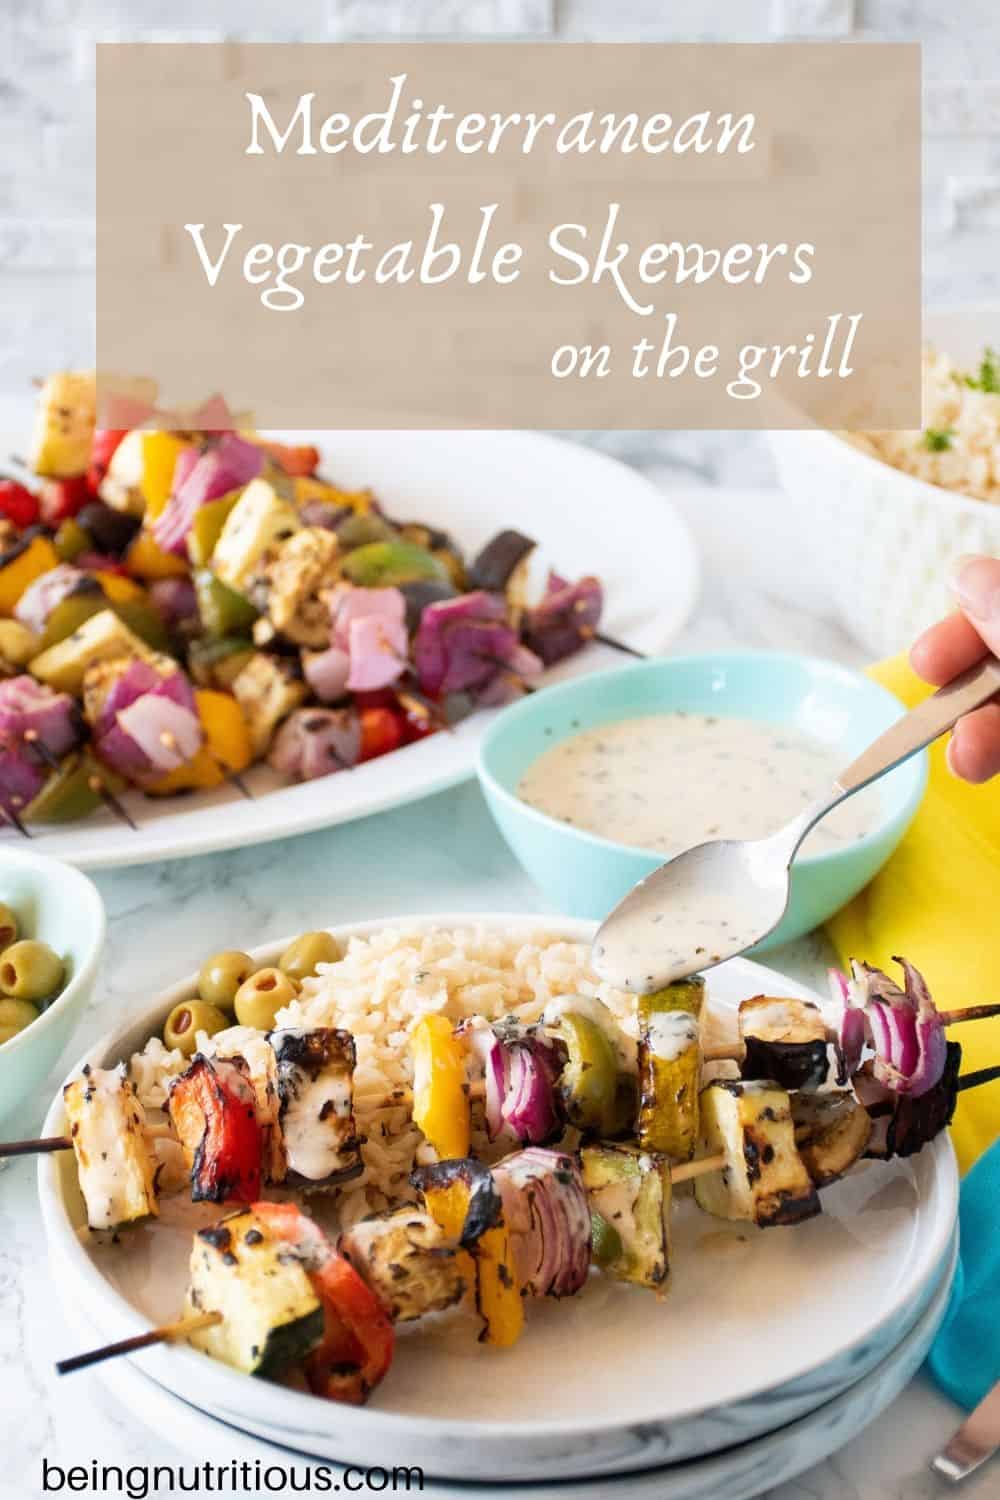 Plate with 2 veggie skewers and rice, with dressing being drizzled over. Text overlay: Mediterranean Vegetable Skewers on the grill.